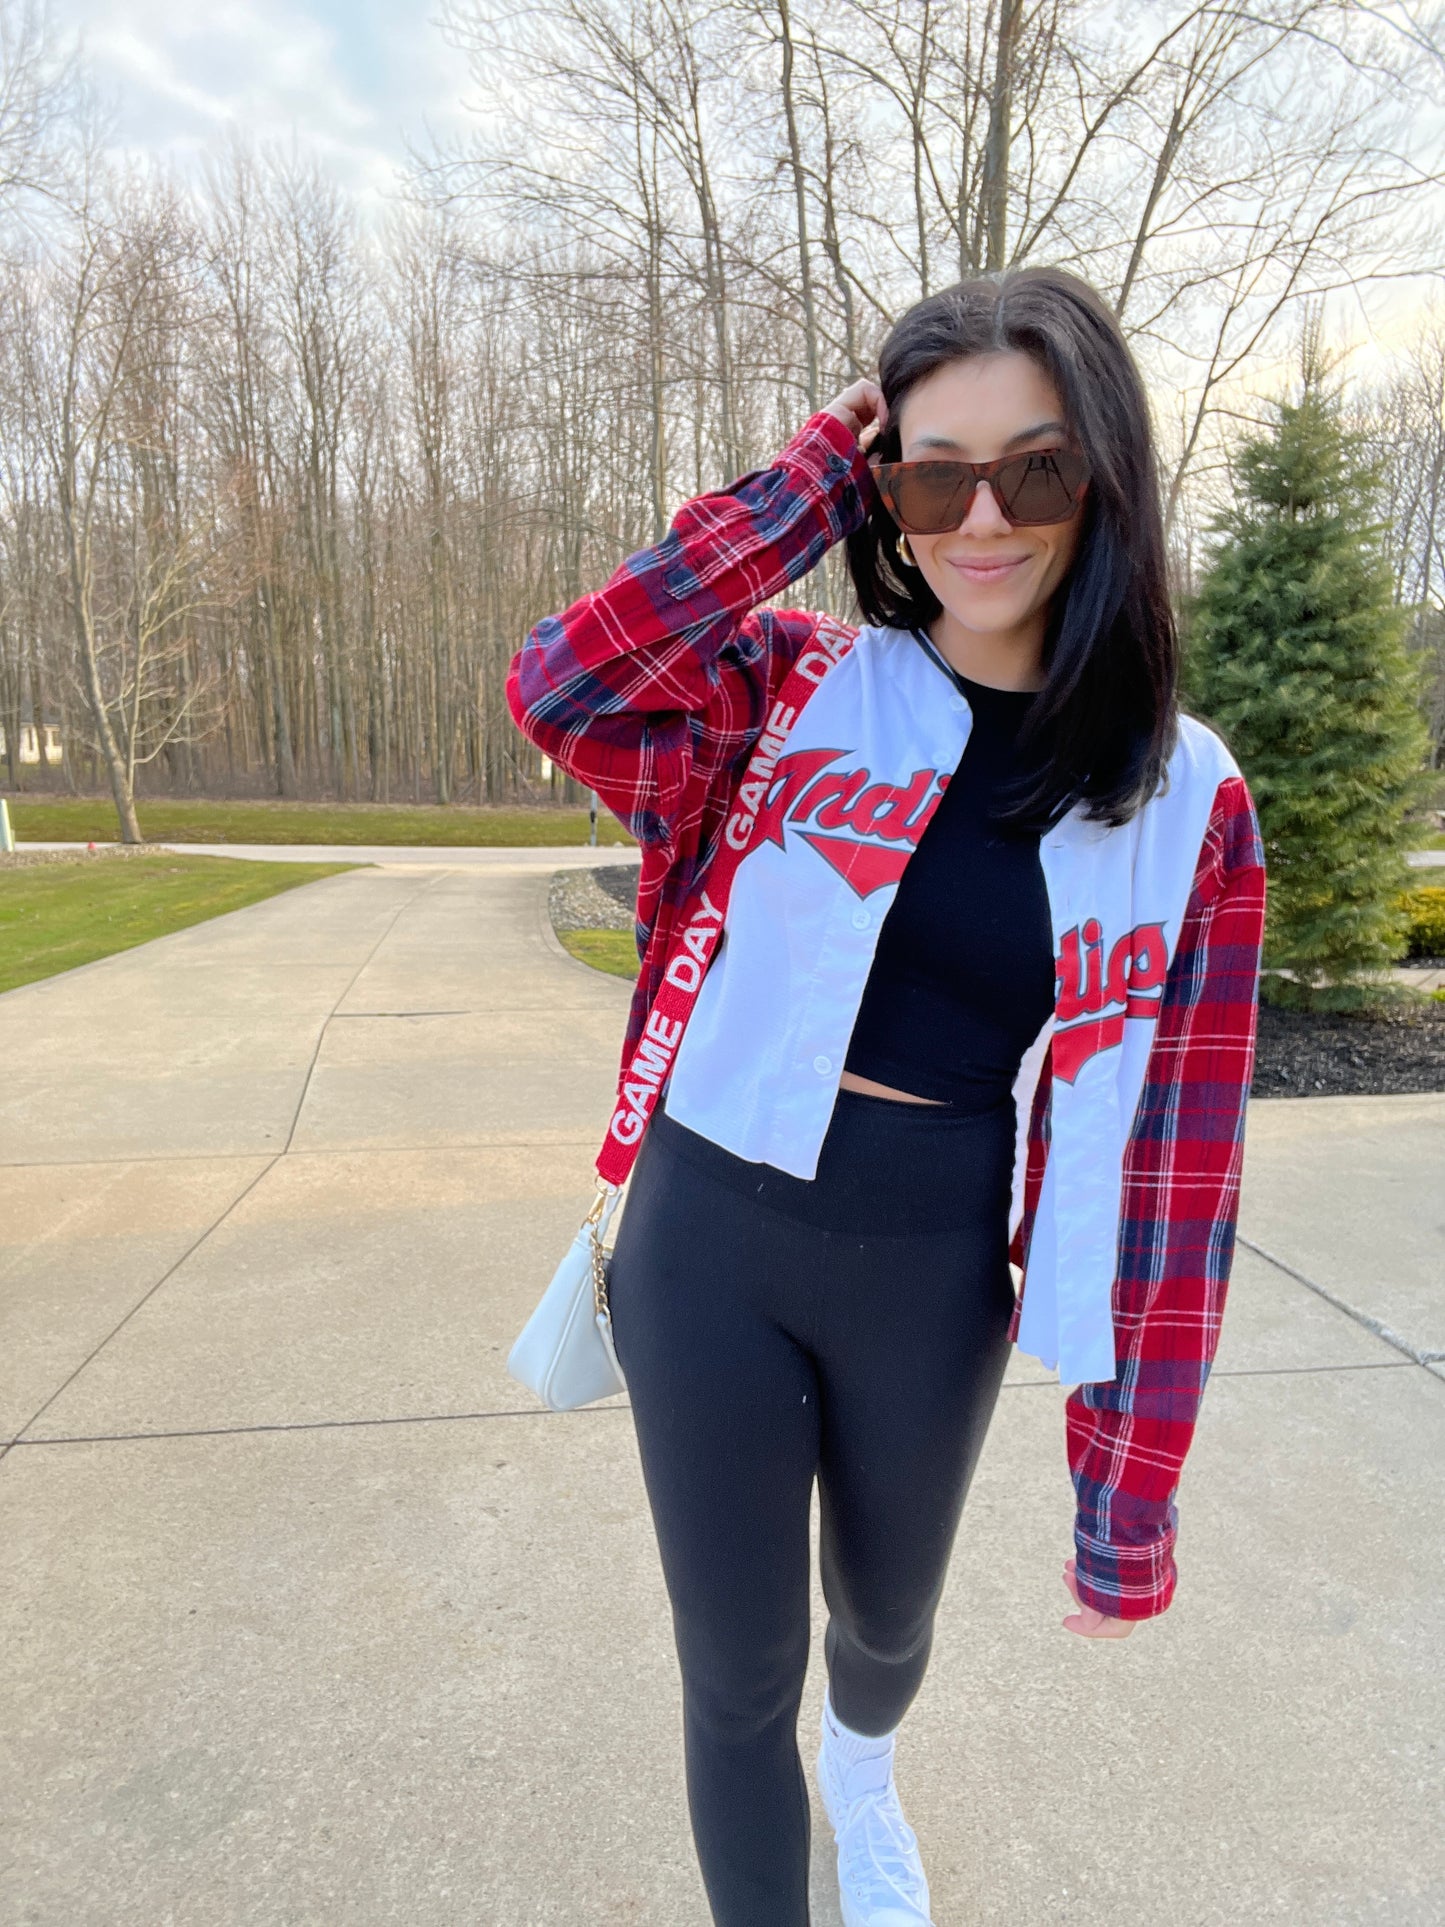 CLEVELAND BASEBALL REYES CROPPED JERSEY X FLANNEL